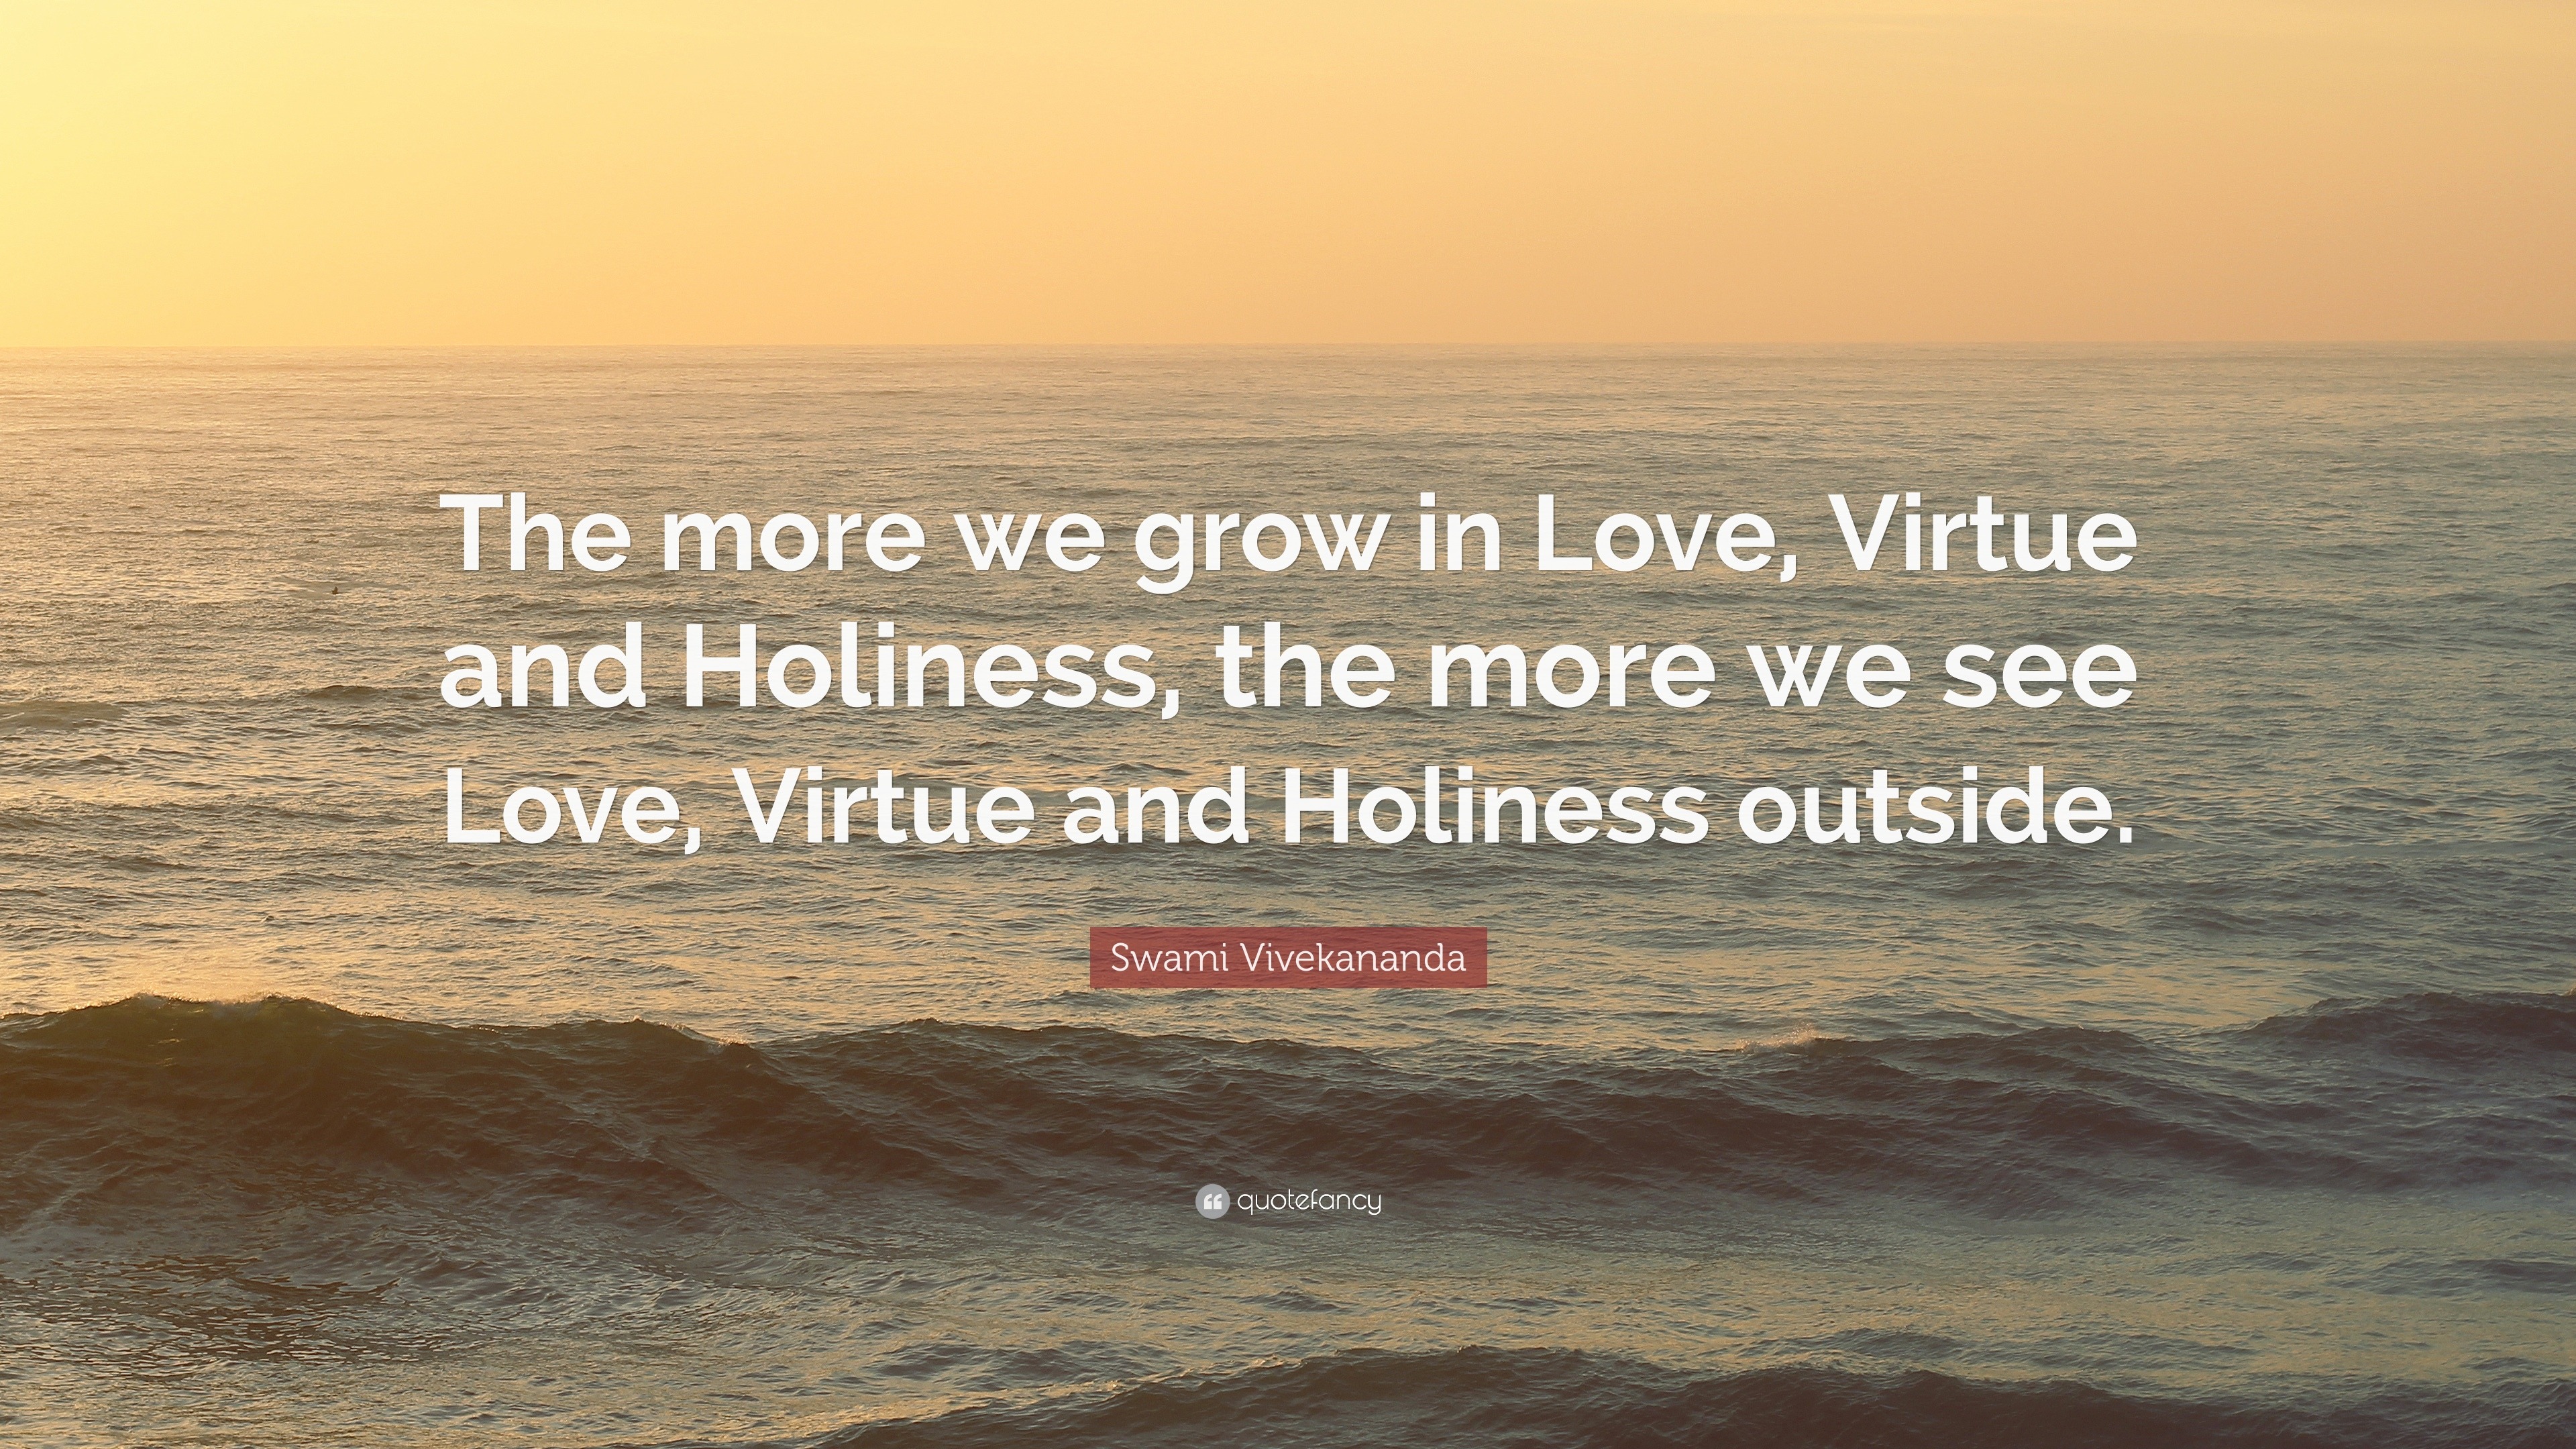 Swami Vivekananda Quote “The more we grow in Love Virtue and Holiness